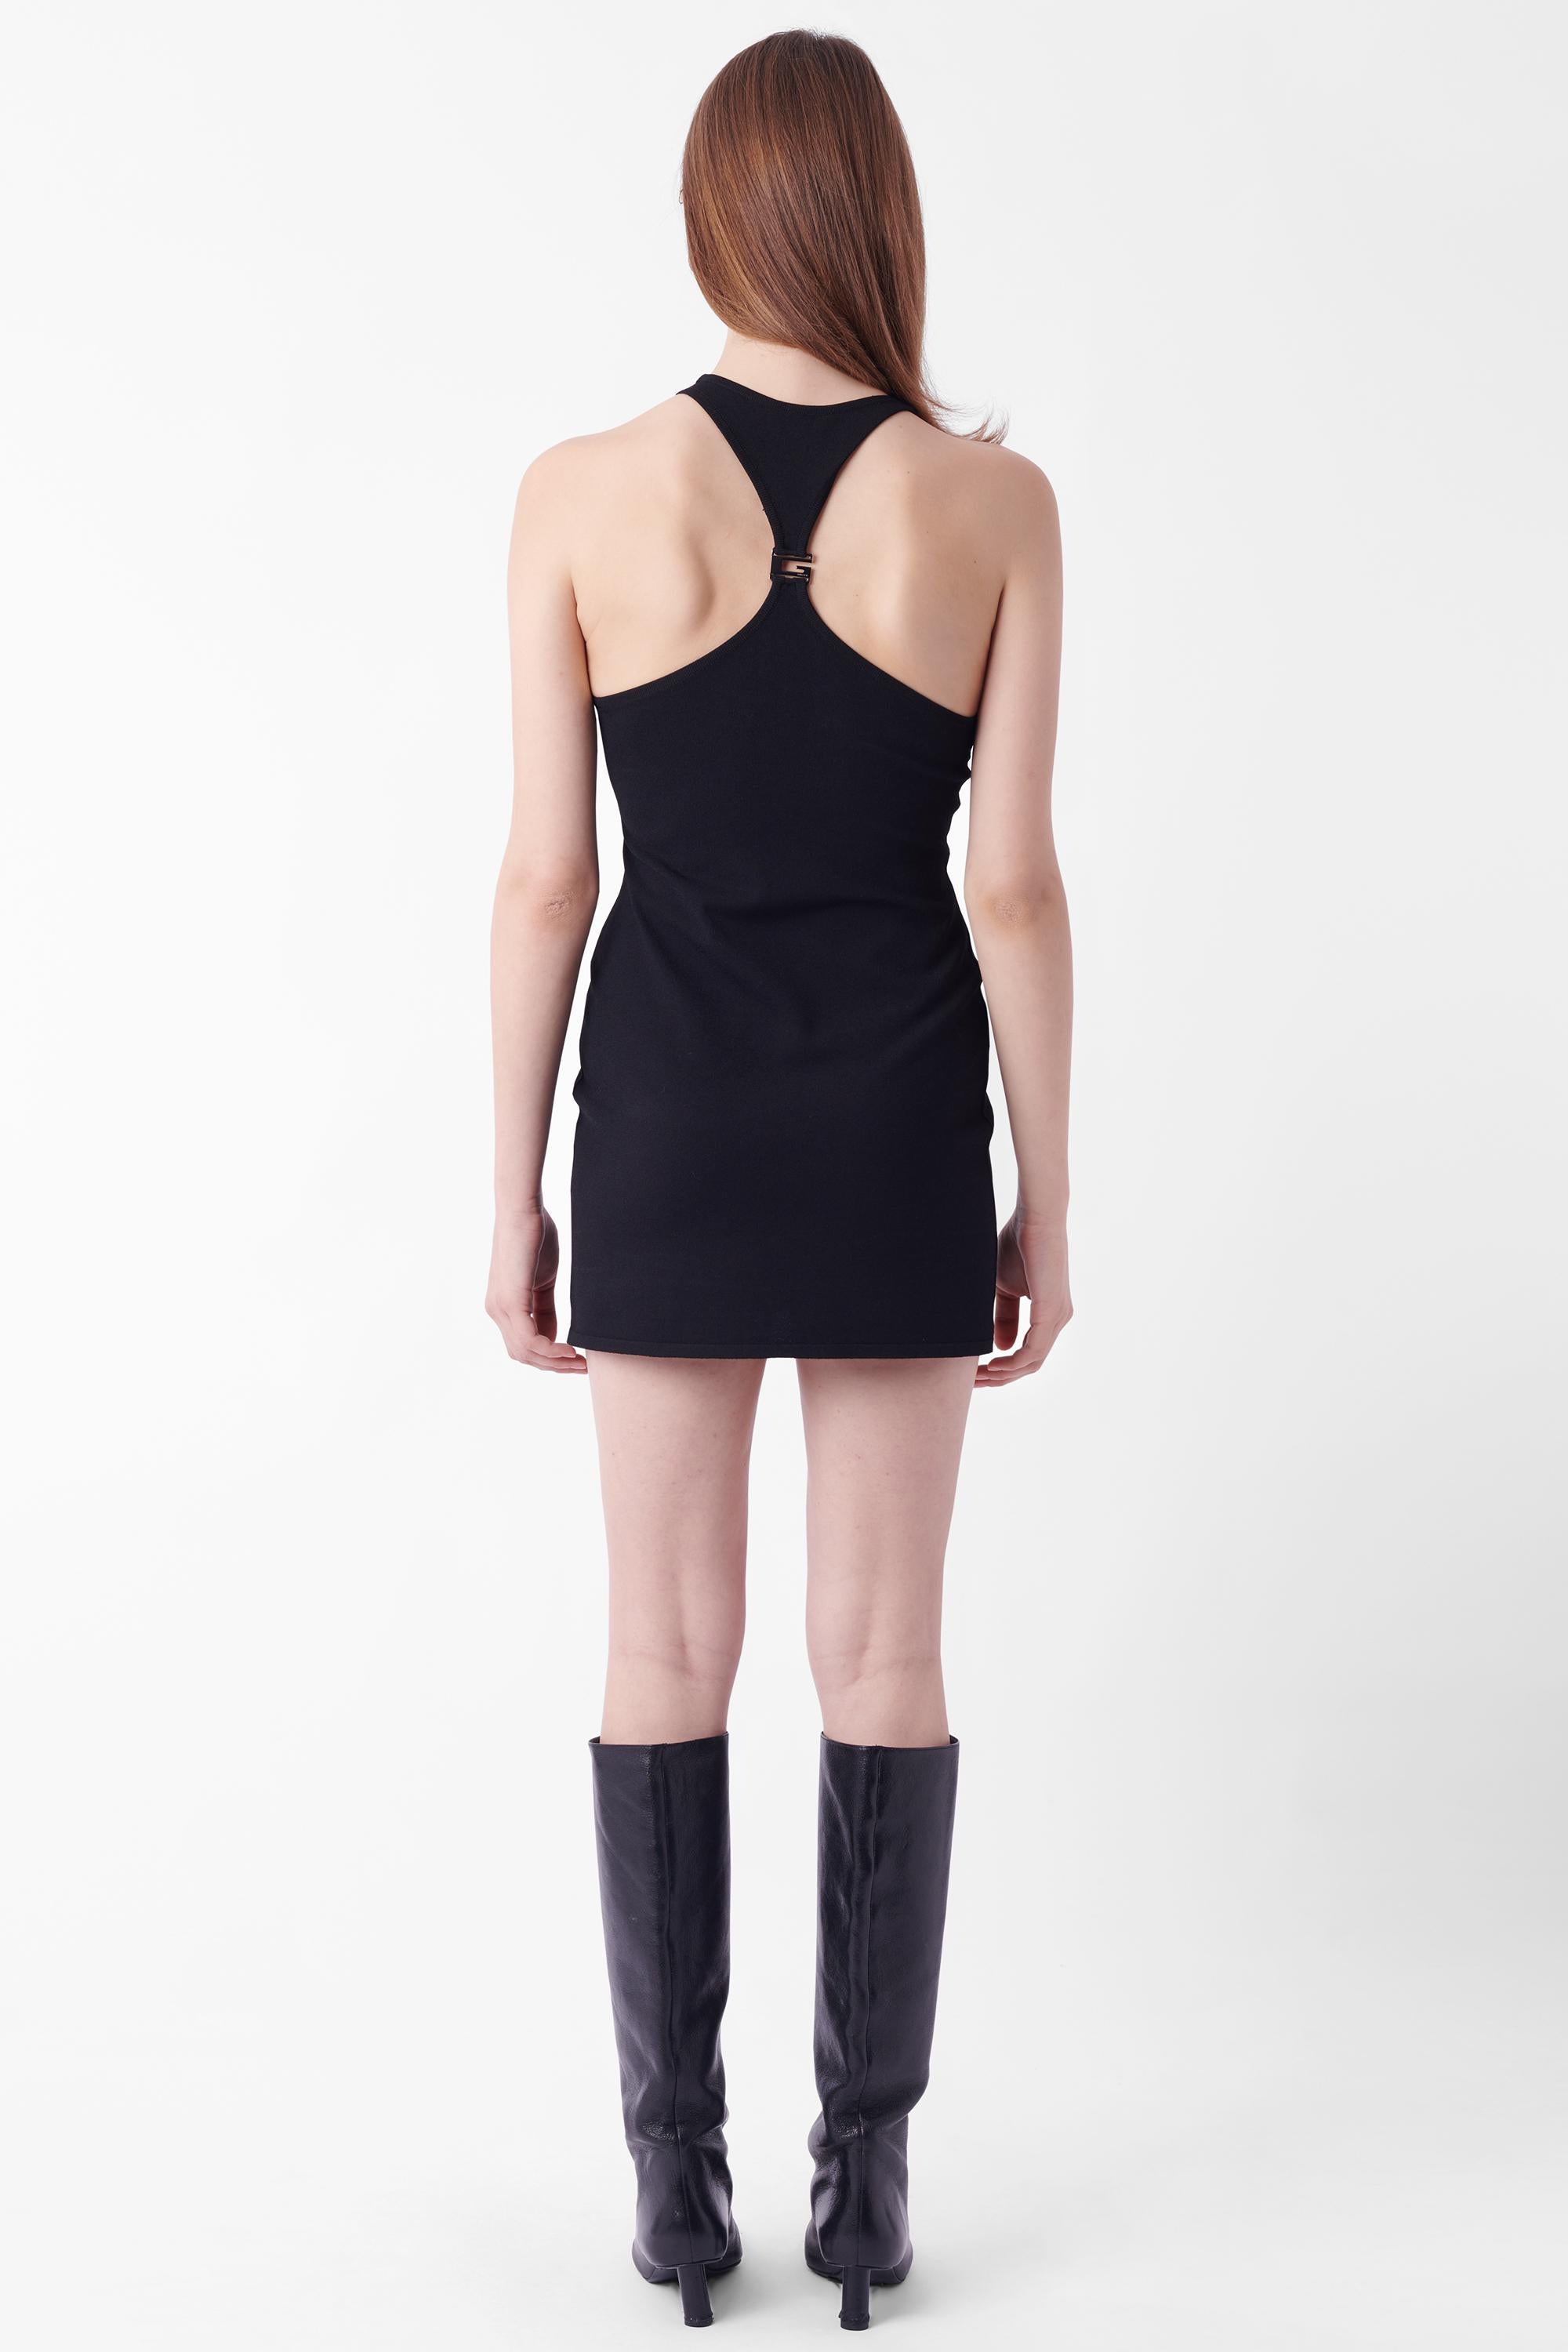 Tom Ford for Gucci Spring Summer 1998 racerback mini dress. Features racerback detailing with dark Gucci hardware clasp in mini length. In excellent vintage condition.
Brand: Gucci
Size: UK 8
Color: Black
Label size: IT 38
Modern size: UK: 8, US: 4,